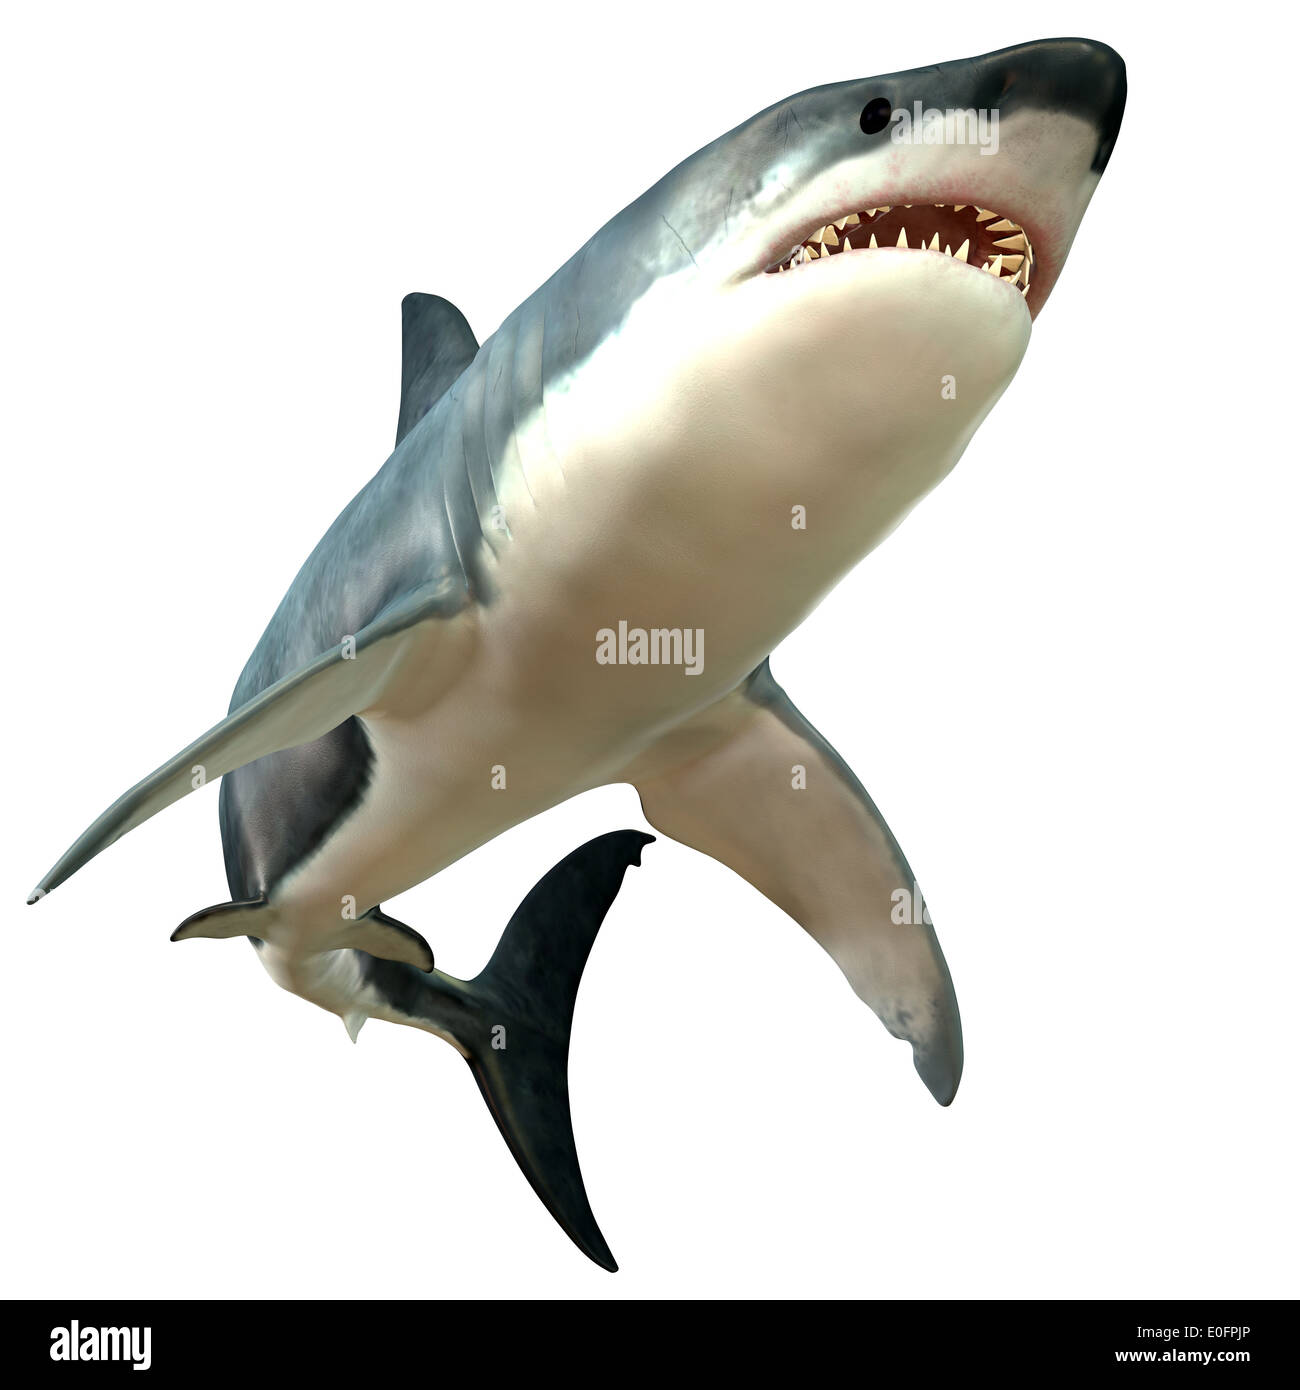 The Great White Shark is the largest predatory fish in the sea and can grow to 26 feet and live as long as 70 years. Stock Photo